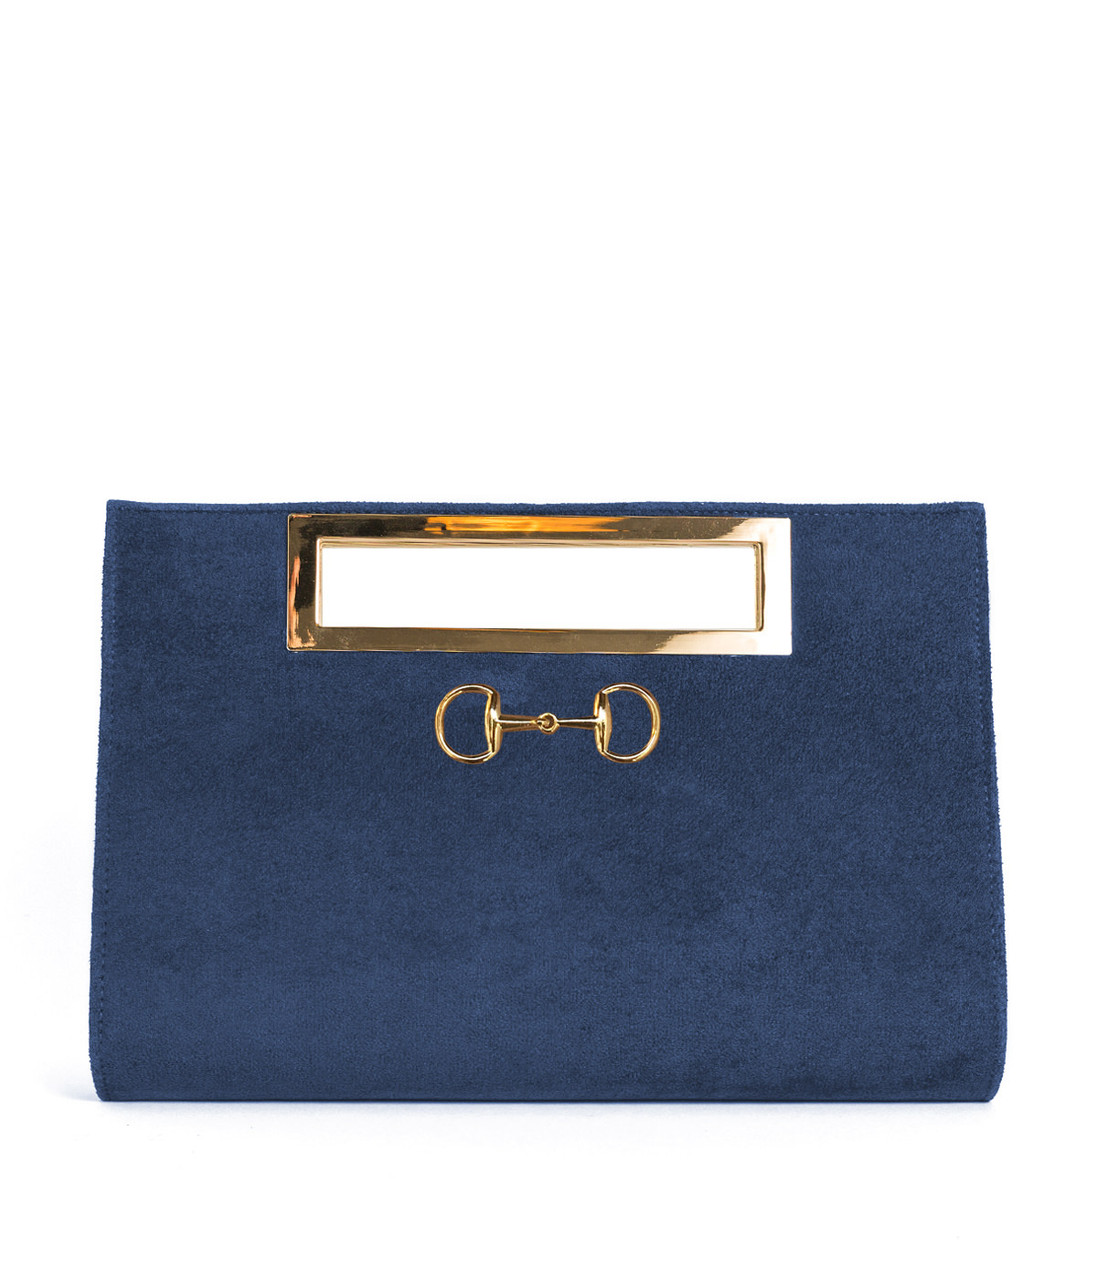 SOPHIE CLUTCH IN SUEDE EMBROIDERED DELAUNAY - CARIBOU - Chloe Ramseyer